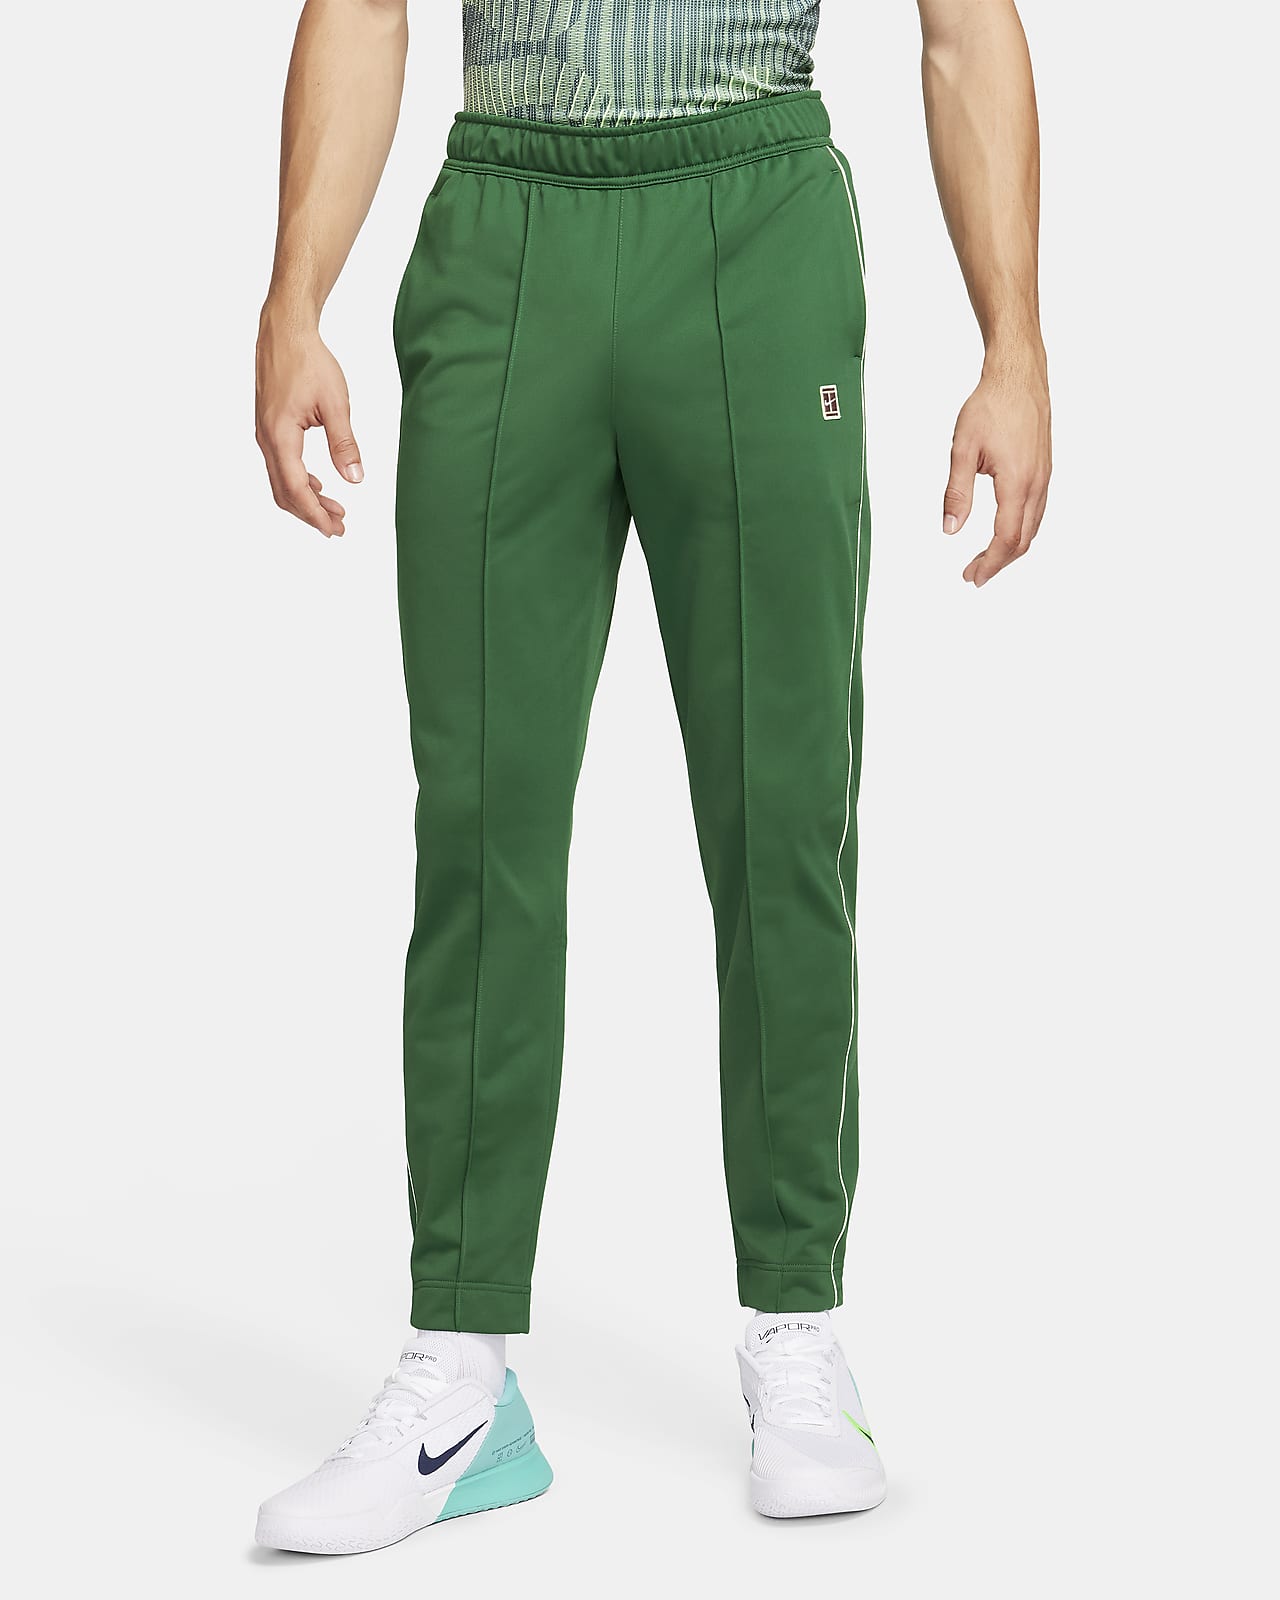 all in motion Solid Green Sweatpants Size XL - 25% off